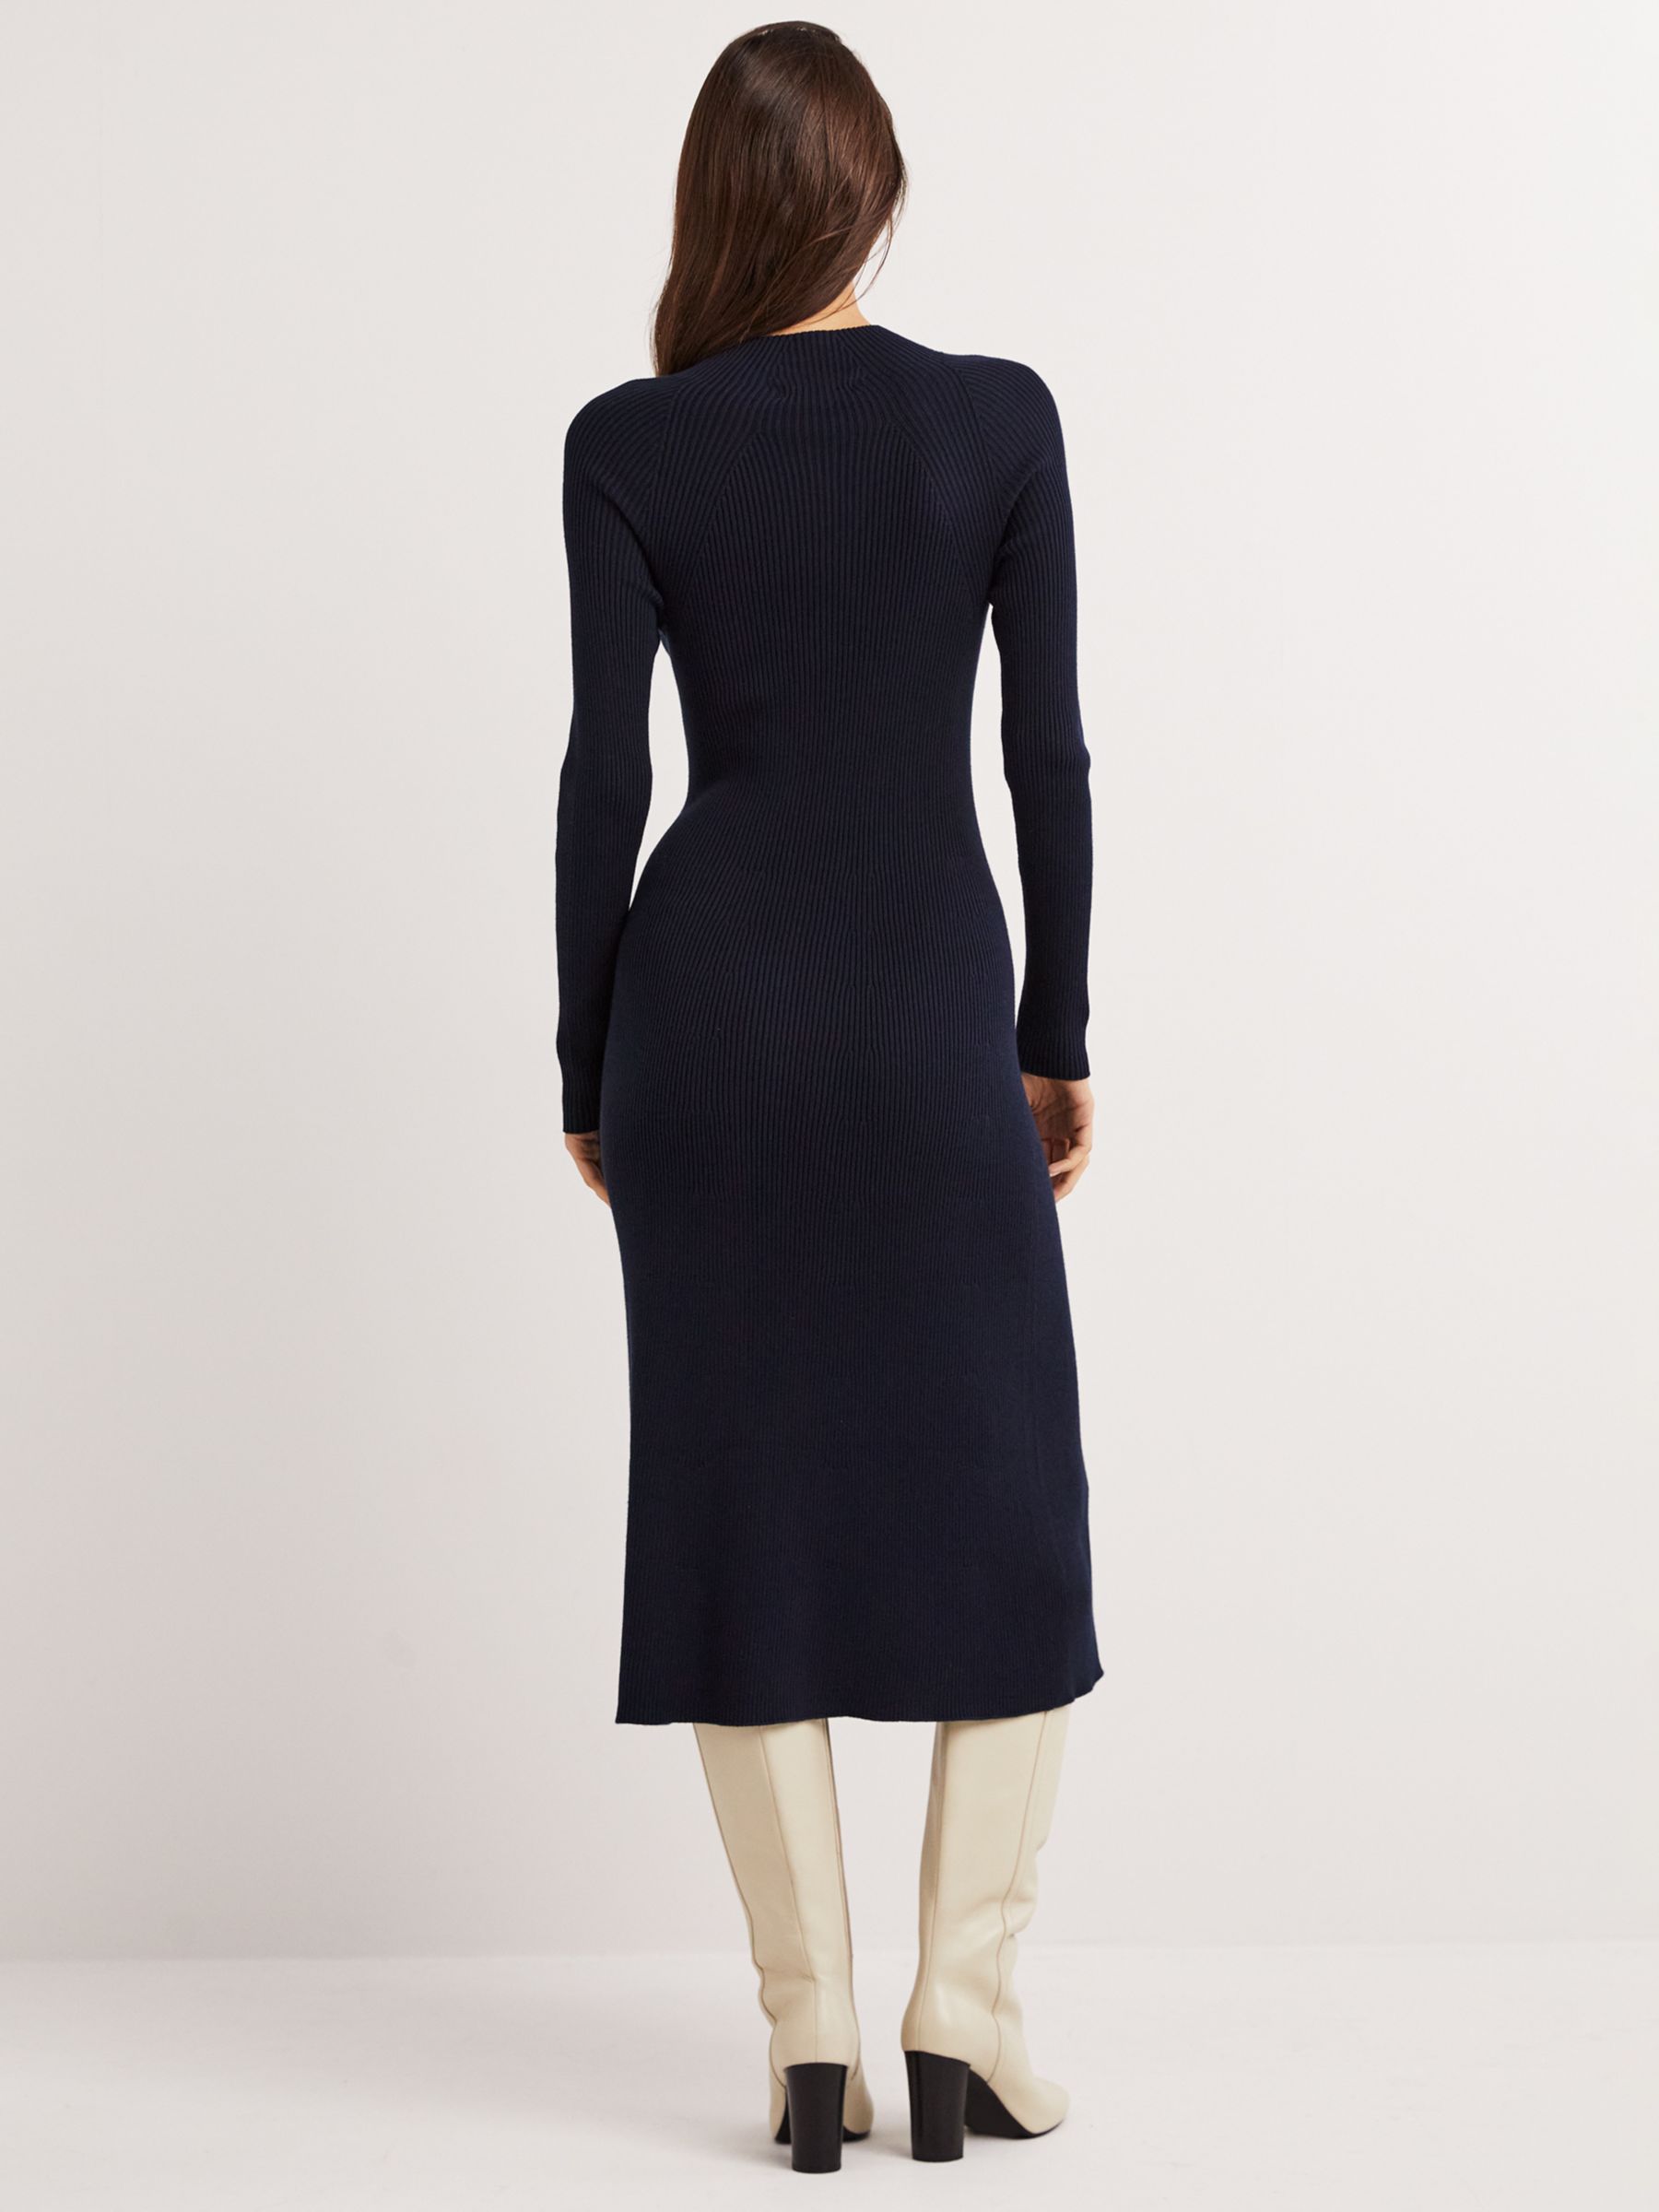 Boden Ribbed Knitted Midi Dress, Navy at John Lewis & Partners